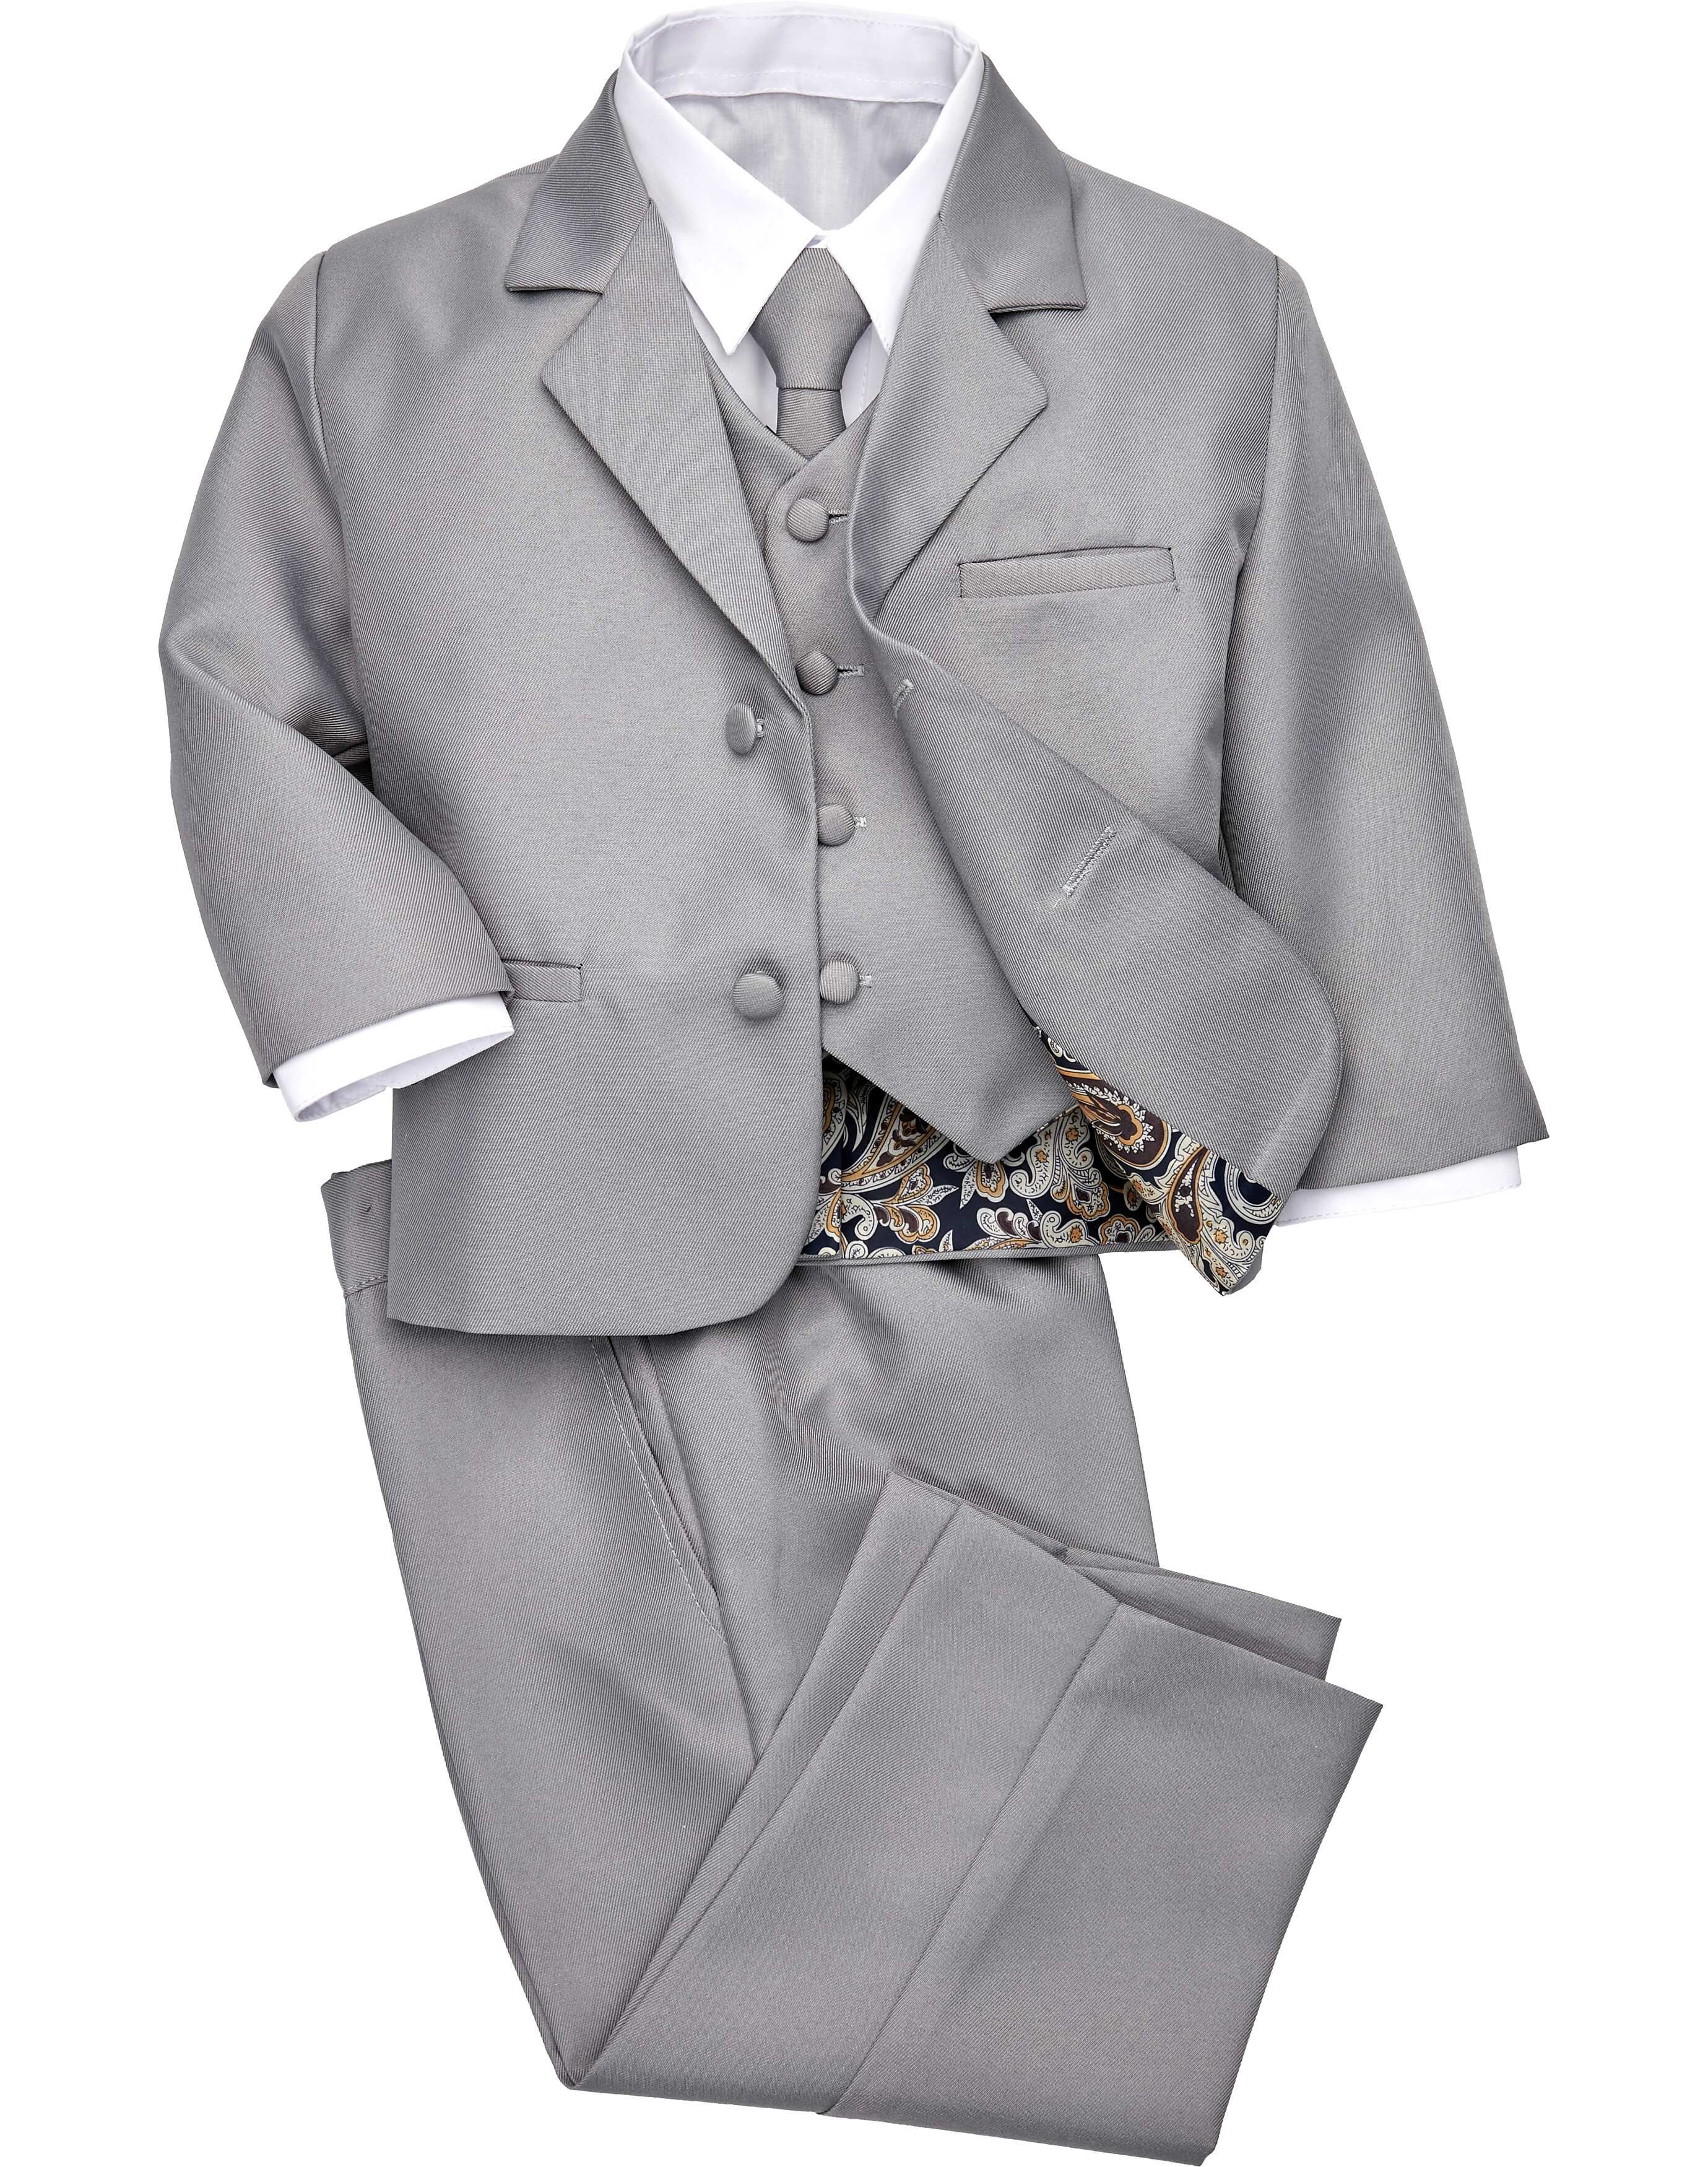 Peanut Butter Collection Toddlers Tuxedo, Heather Gray | The Men's Wearhouse